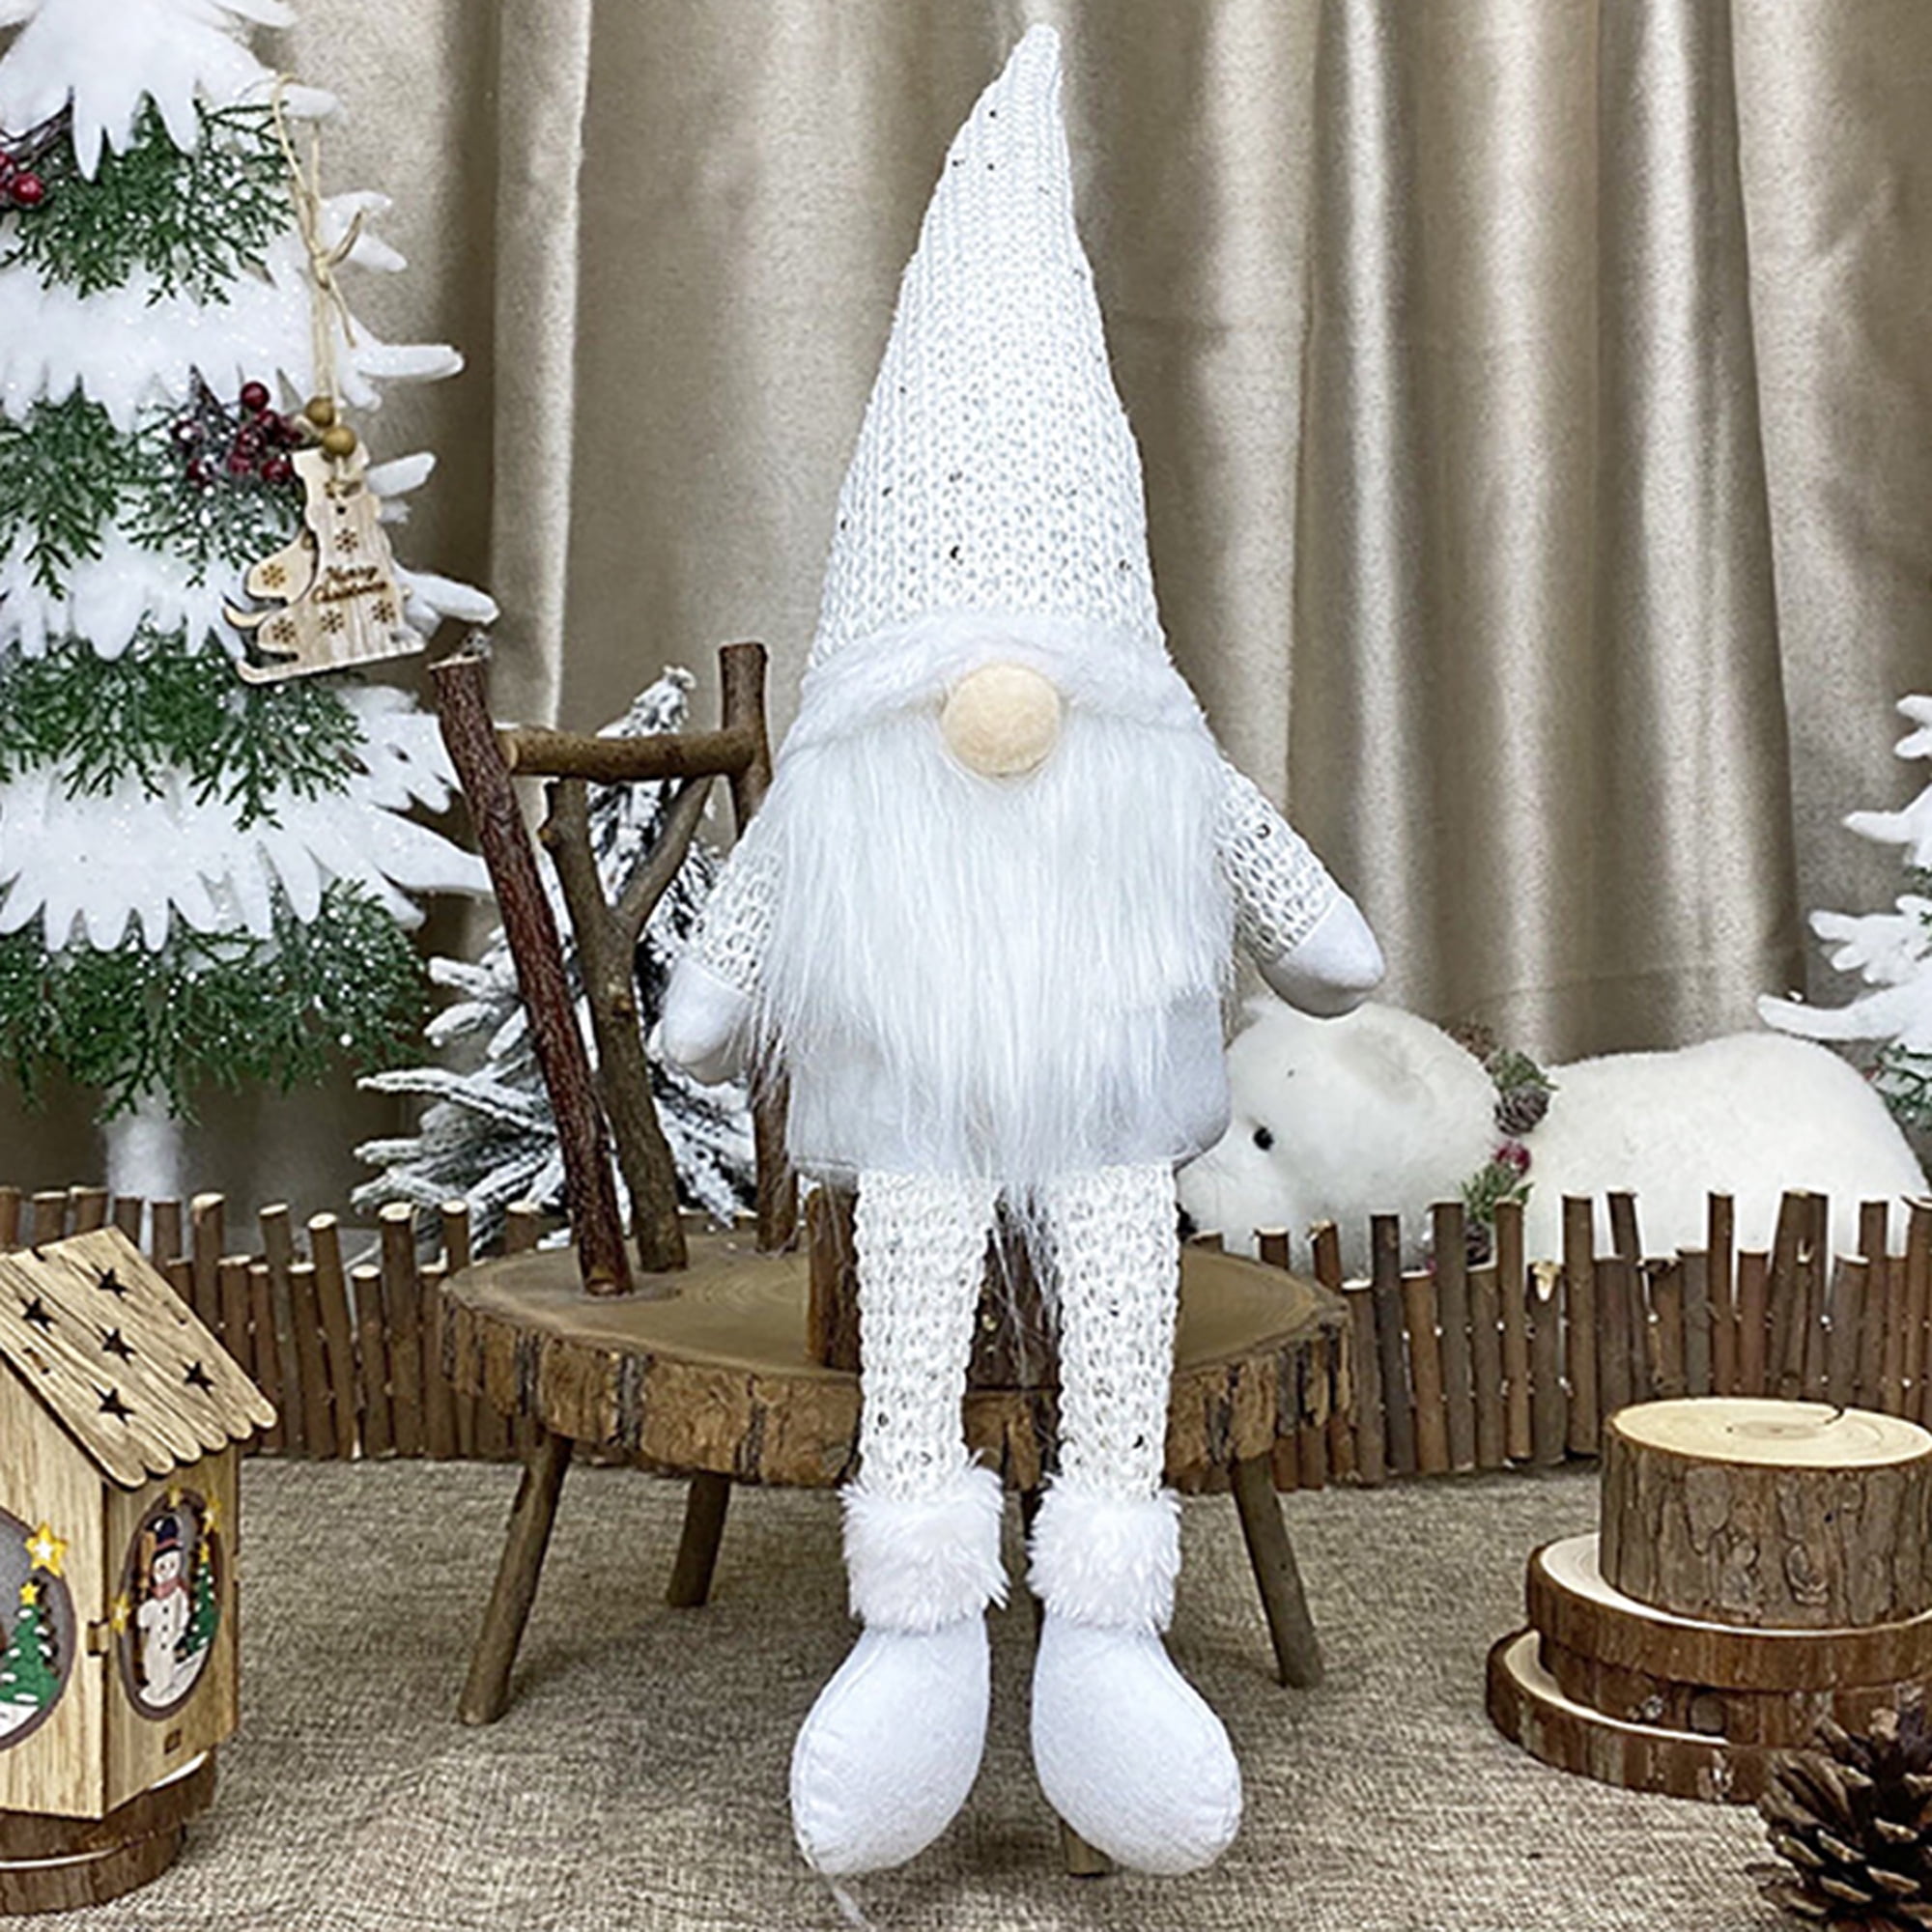 Gnome Gift Welcome to Our Gnome Christmas Ornament Office Party Gift Cute Gnome Accent for Your Christmas Tree With Gift Box